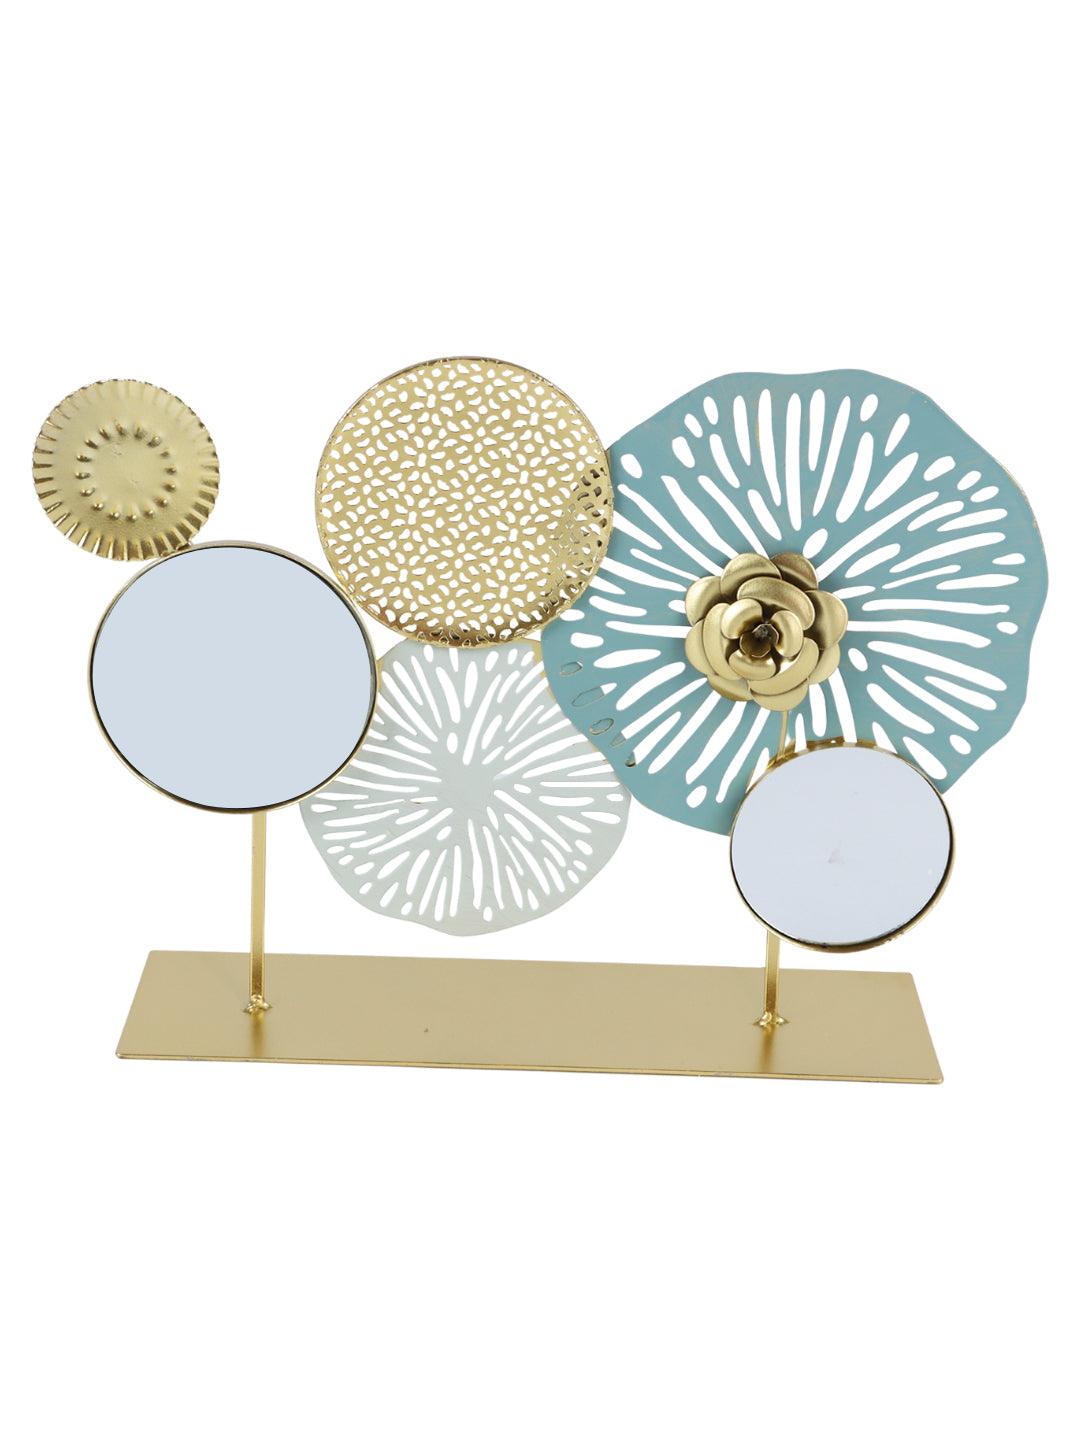 Table Decortive Object Ornament - 4